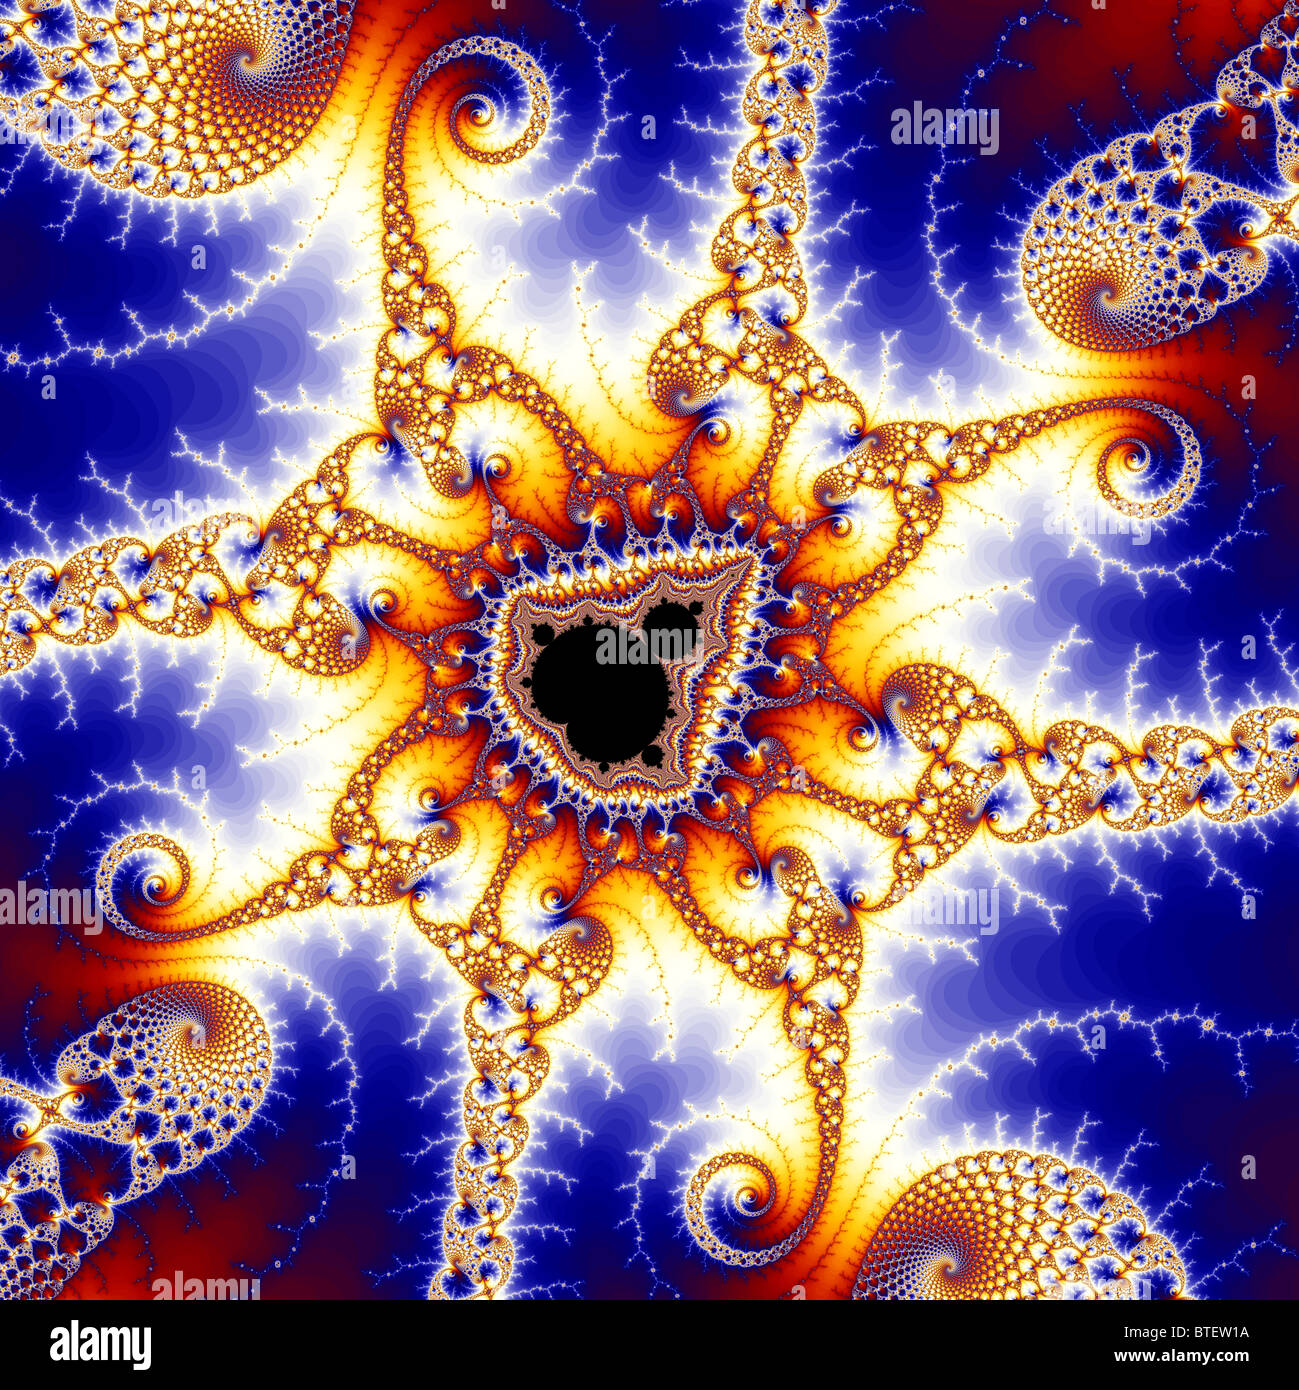 The Mandelbrot Set contains an infinite number of copies of itself, usually surrounded by intricate patterns. Stock Photo